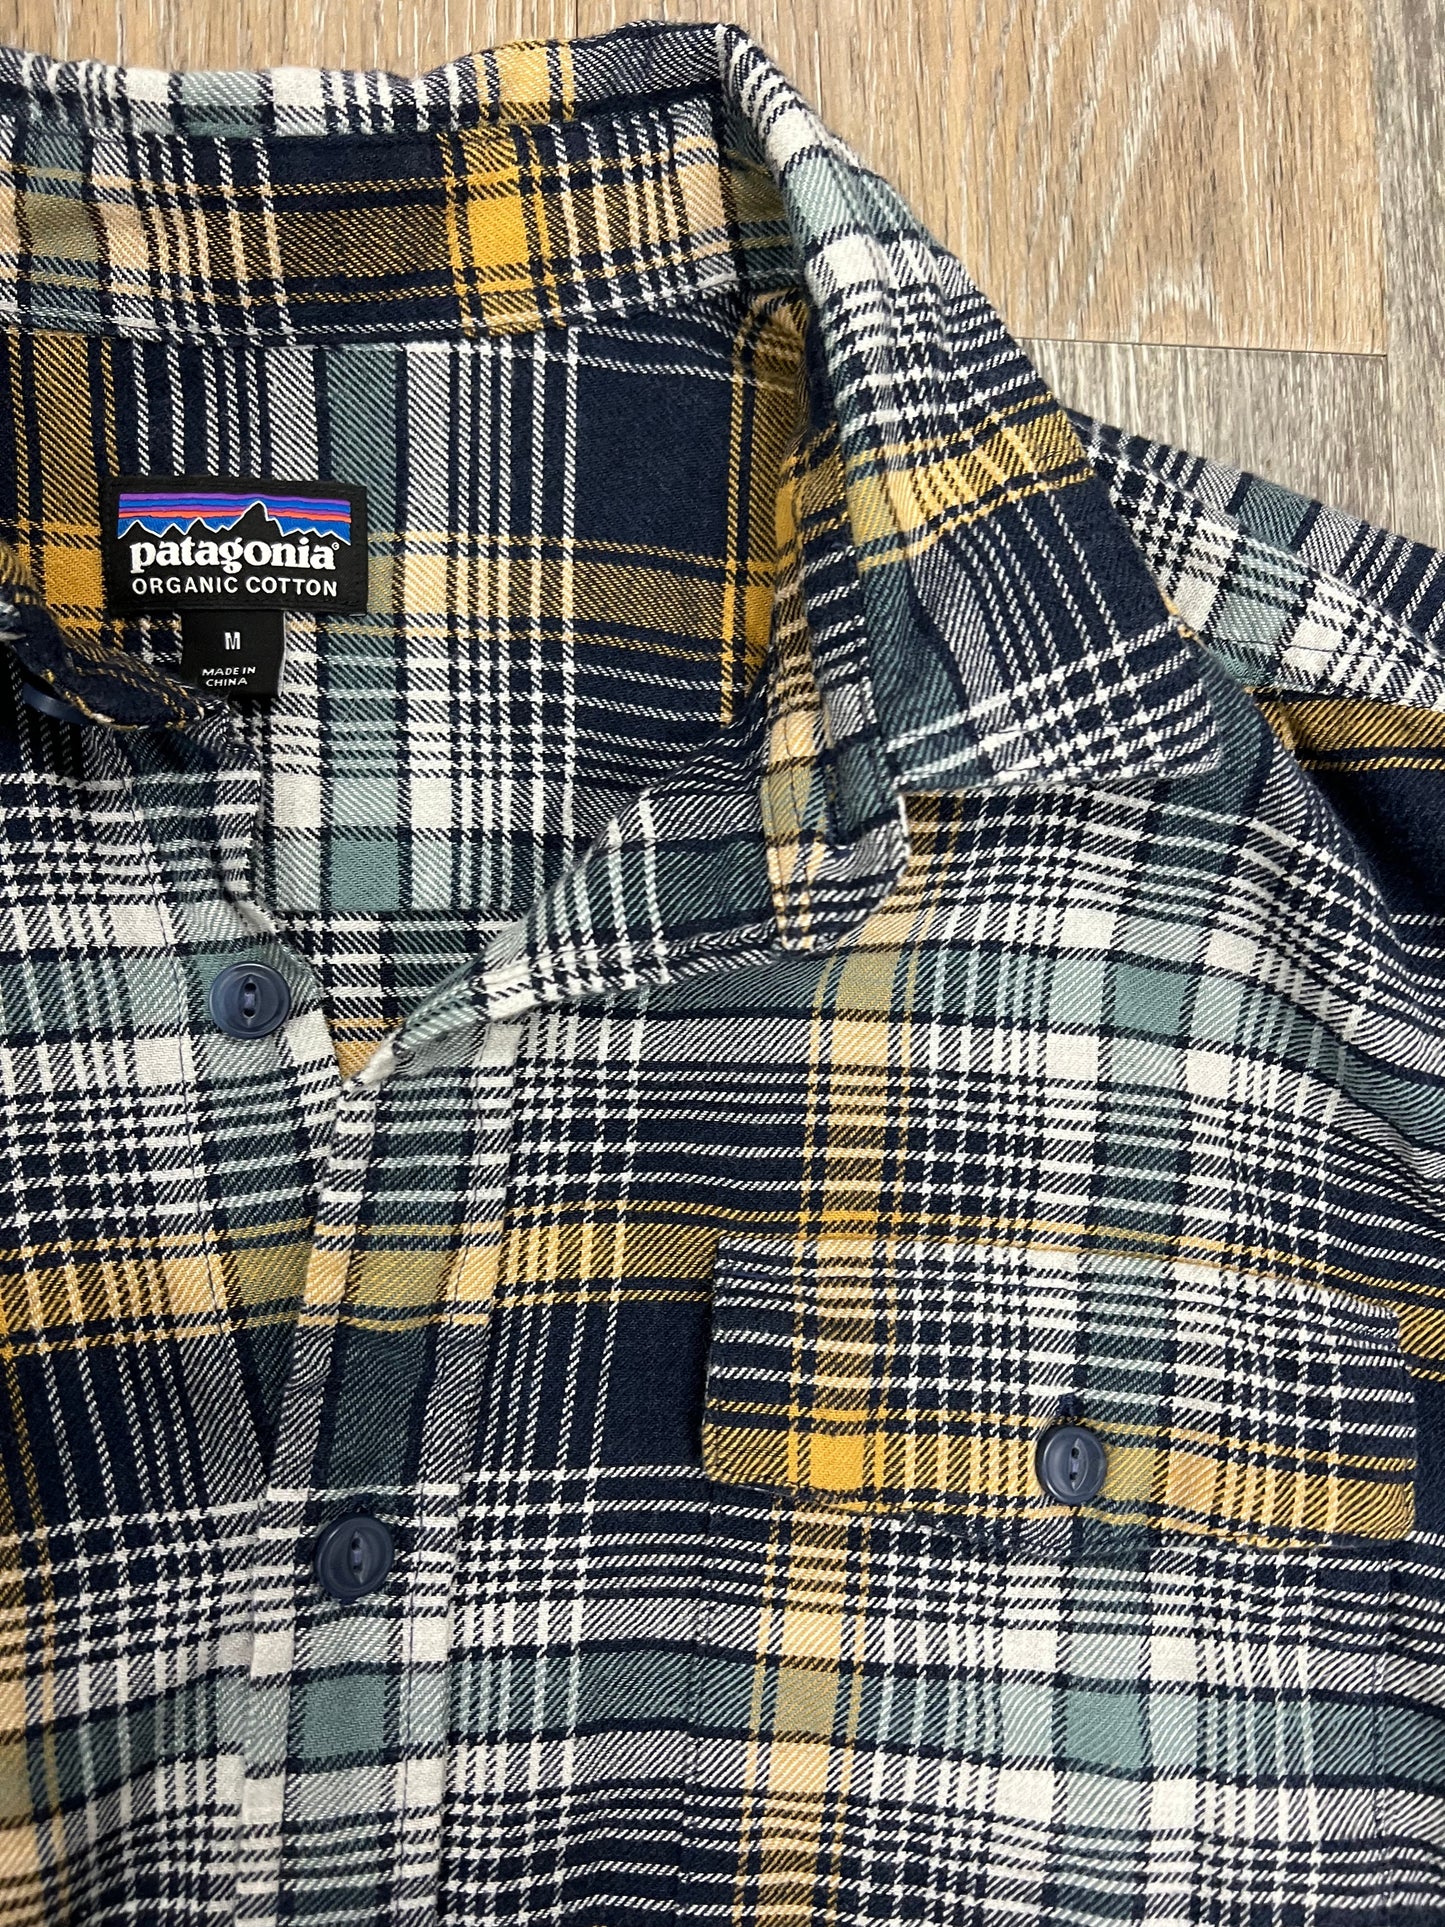 Blouse Flannel  By Patagonia  Size: M